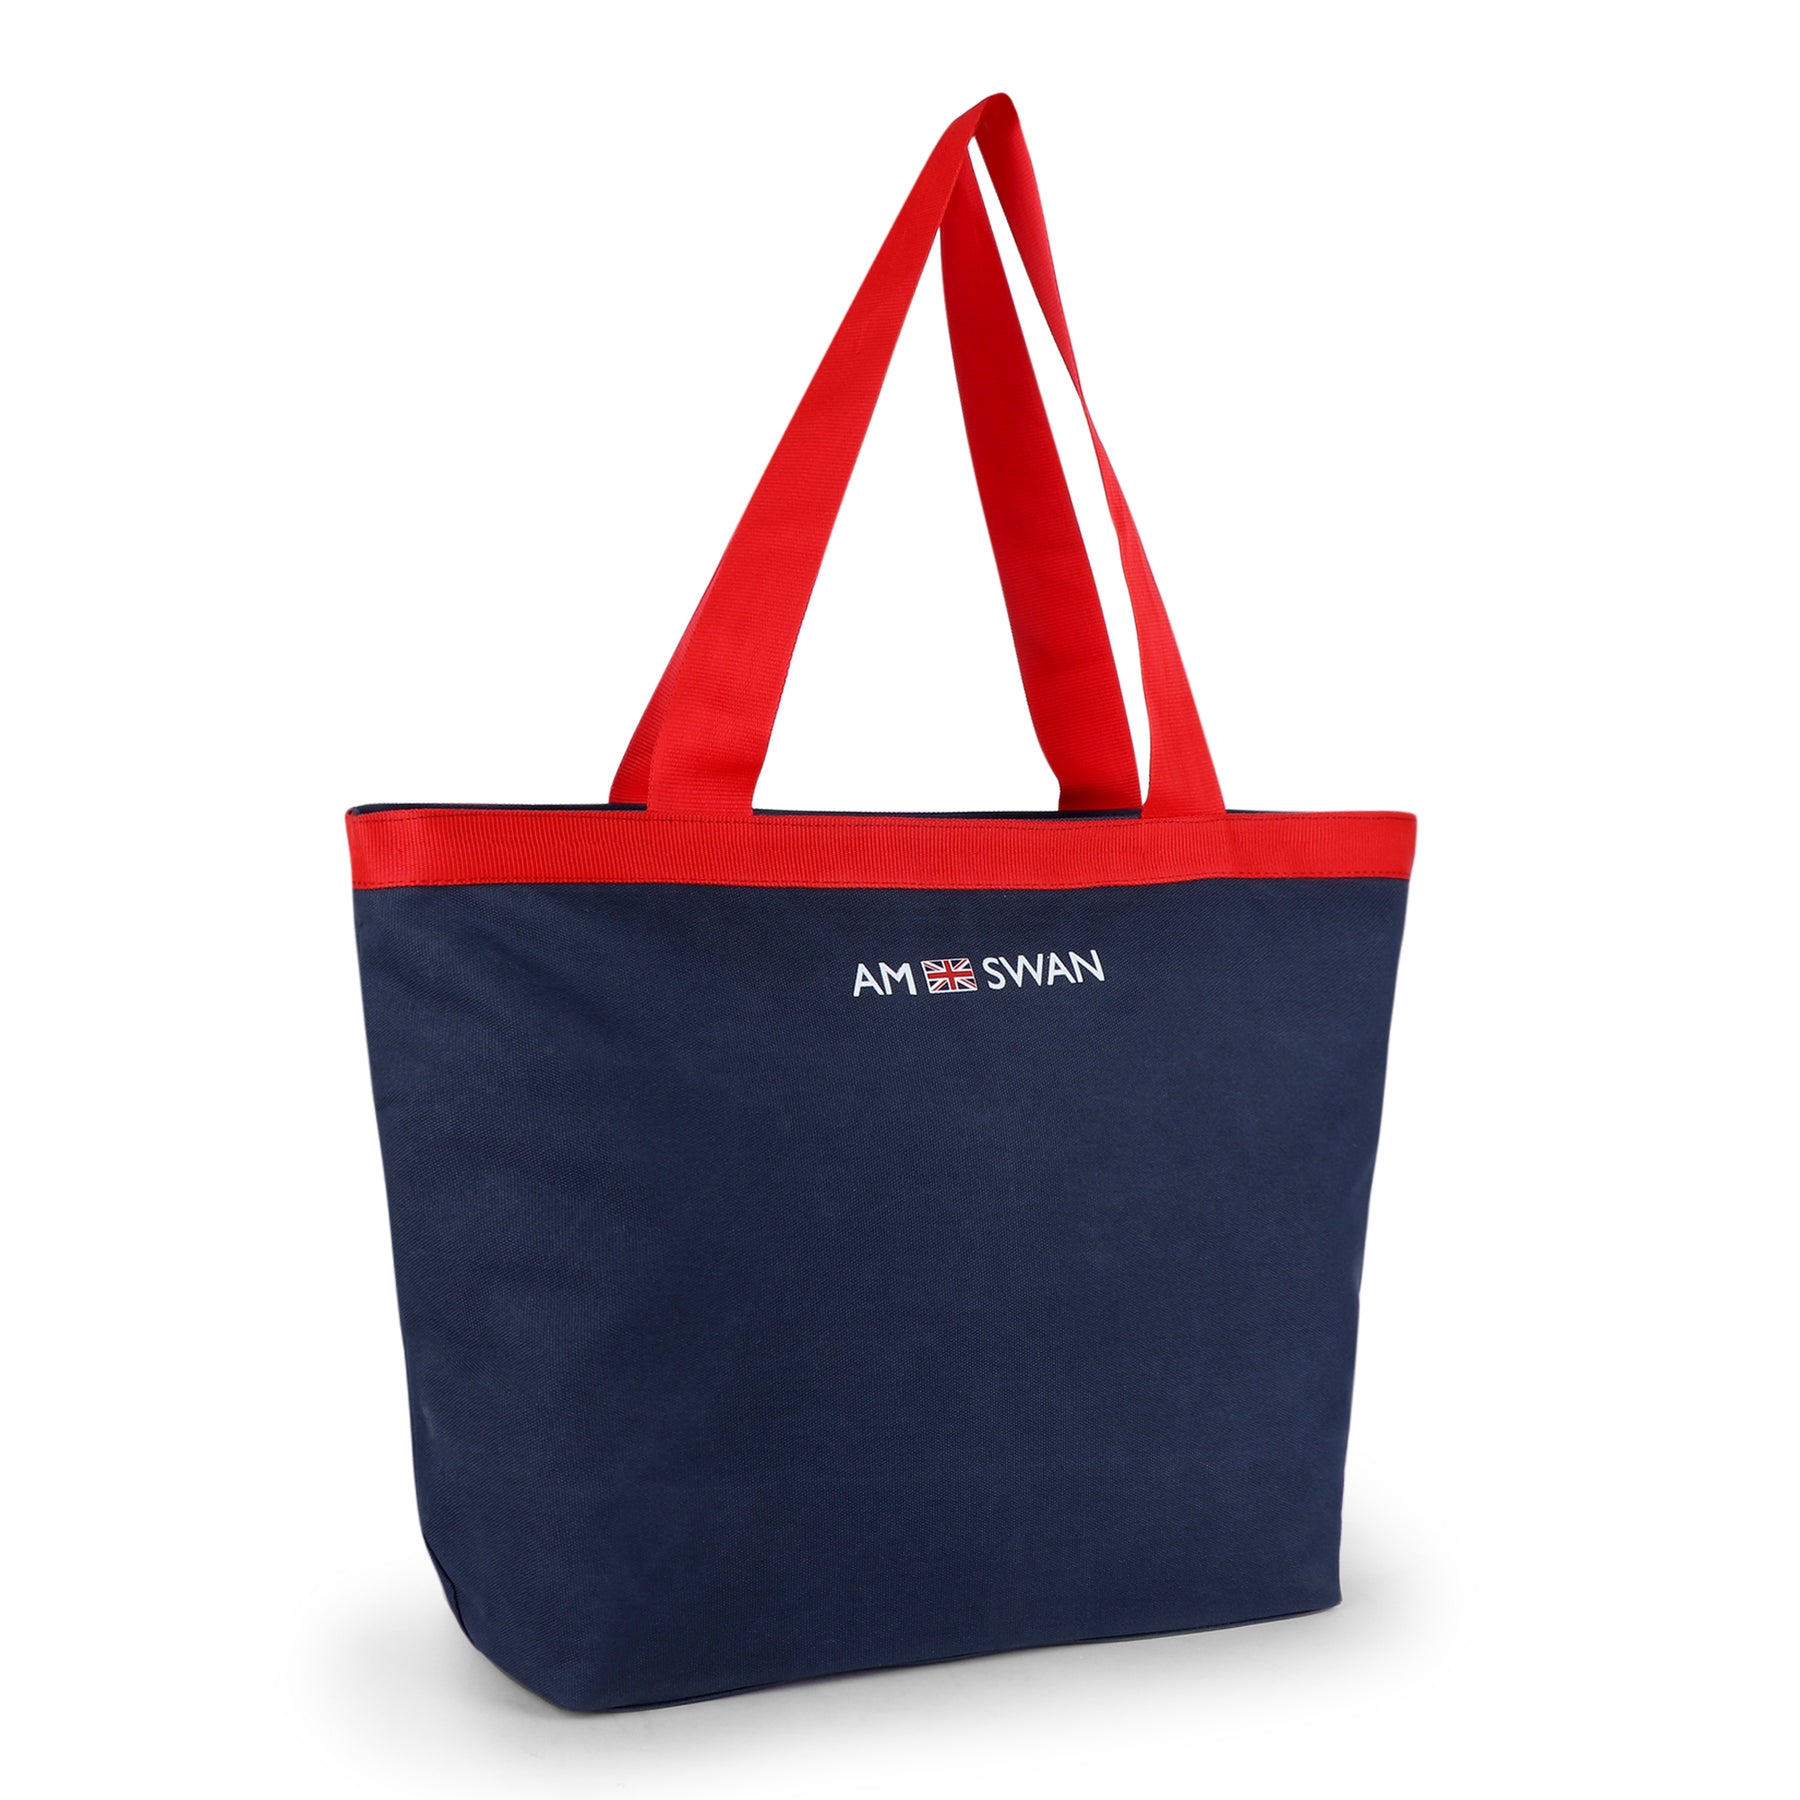 AMSWAN UNISEX BLUE AND RED TOTE BAG